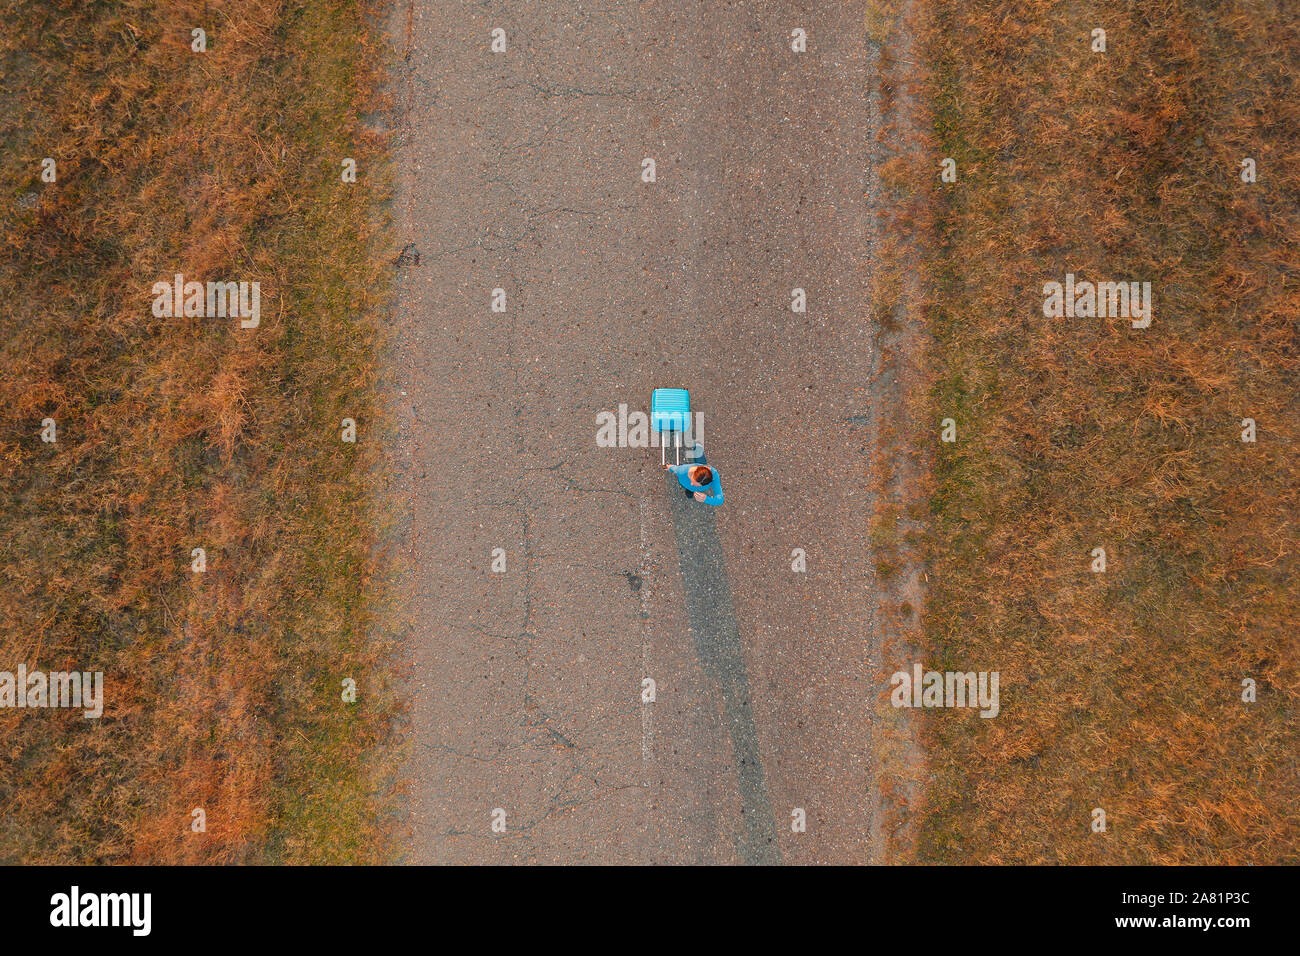 Woman pulling travel suitcase luggage on road in autumn sunset, high angle view from drone pov Stock Photo